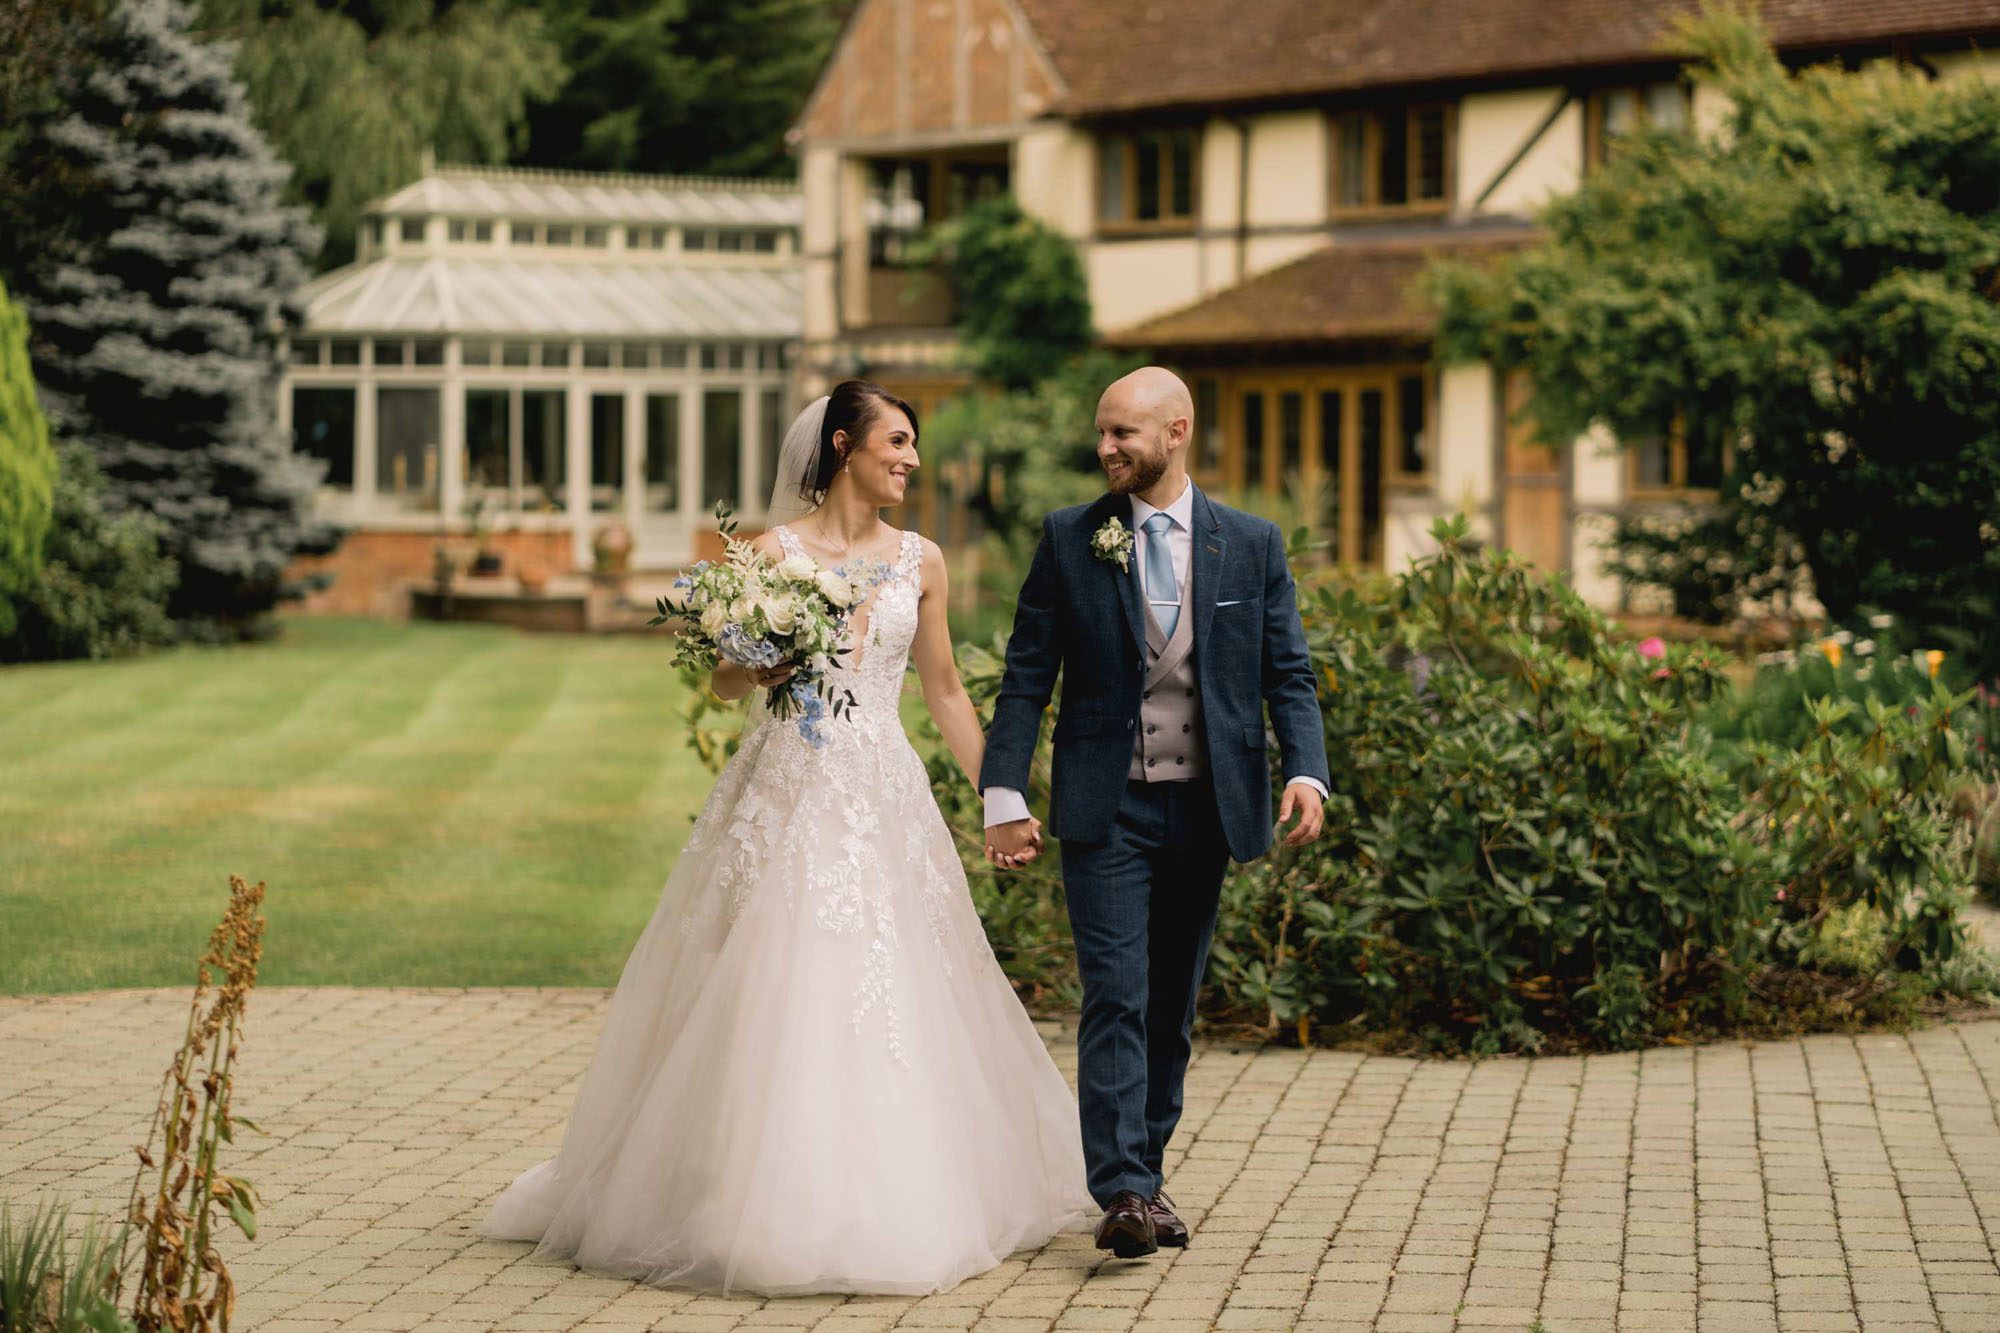 Bride and groom hold hands on their wedding day at Rivervale Barn in Hampshire.